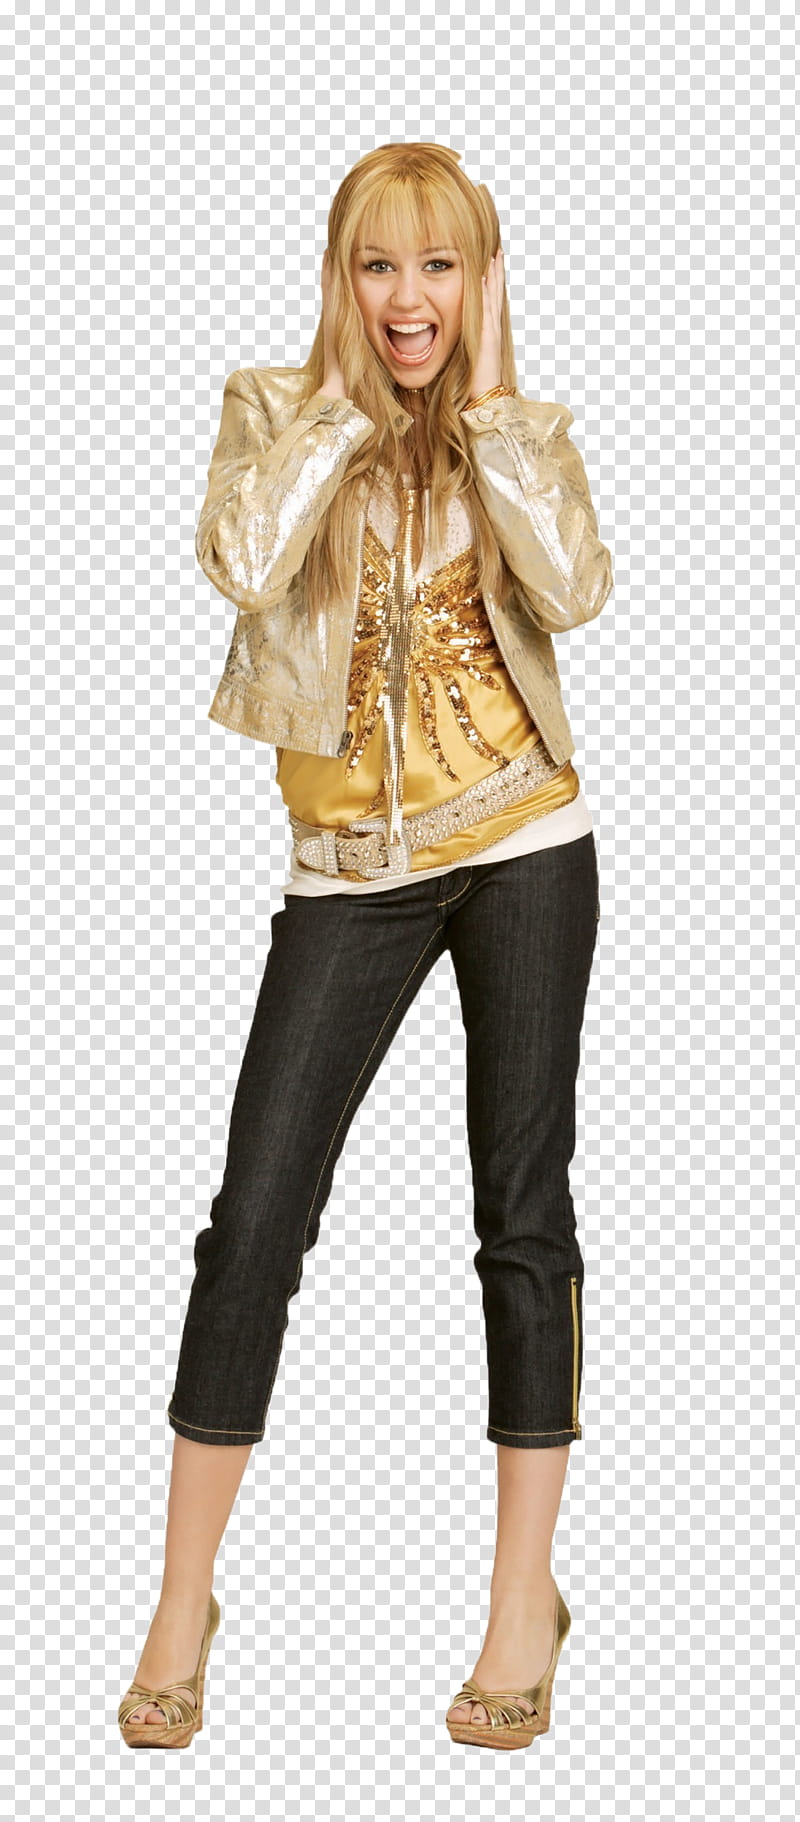 Hannah Montana  s, woman standing on focus transparent background PNG clipart